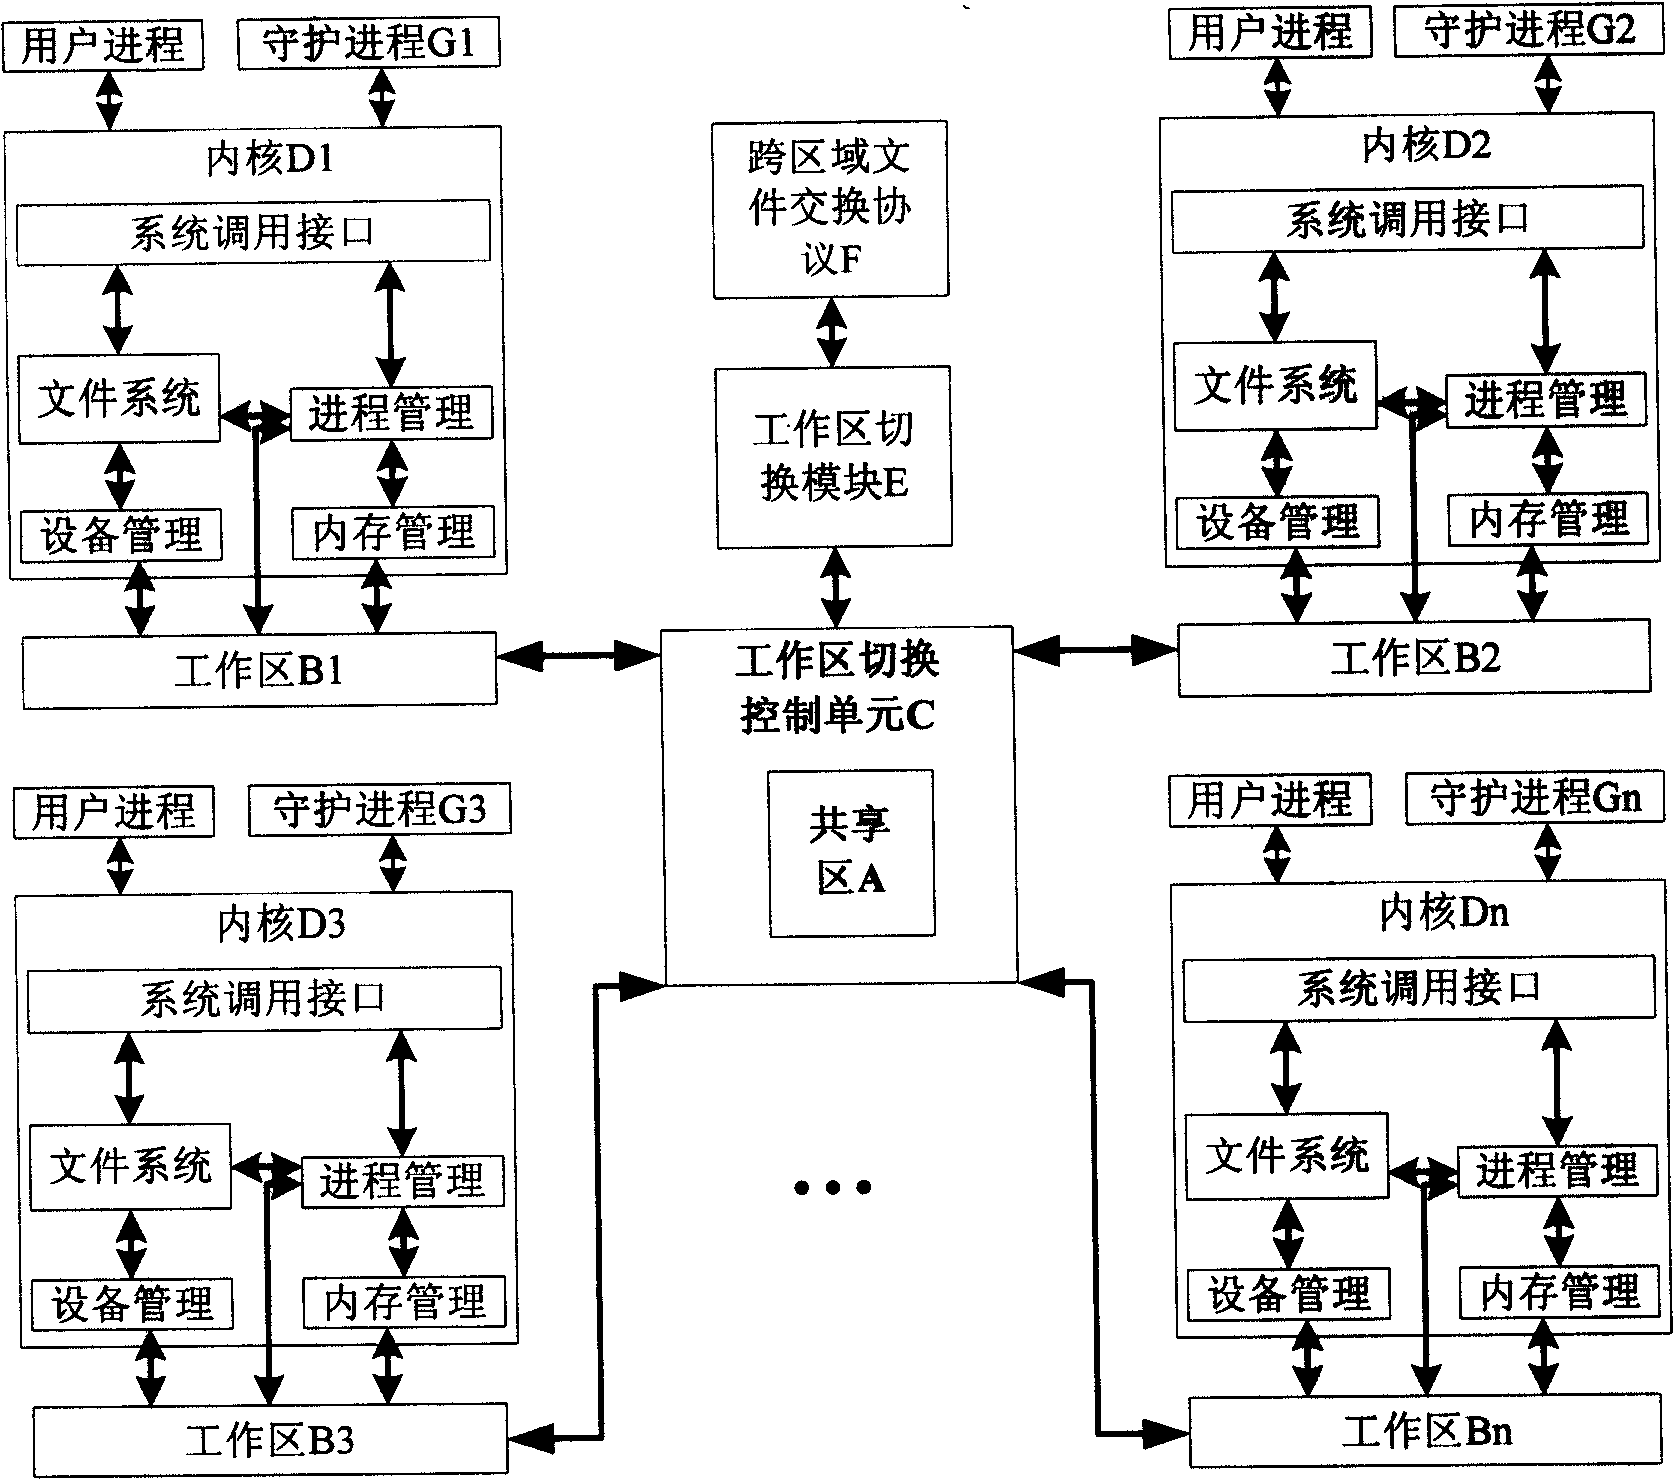 Novel computer system structure and device with networking inside